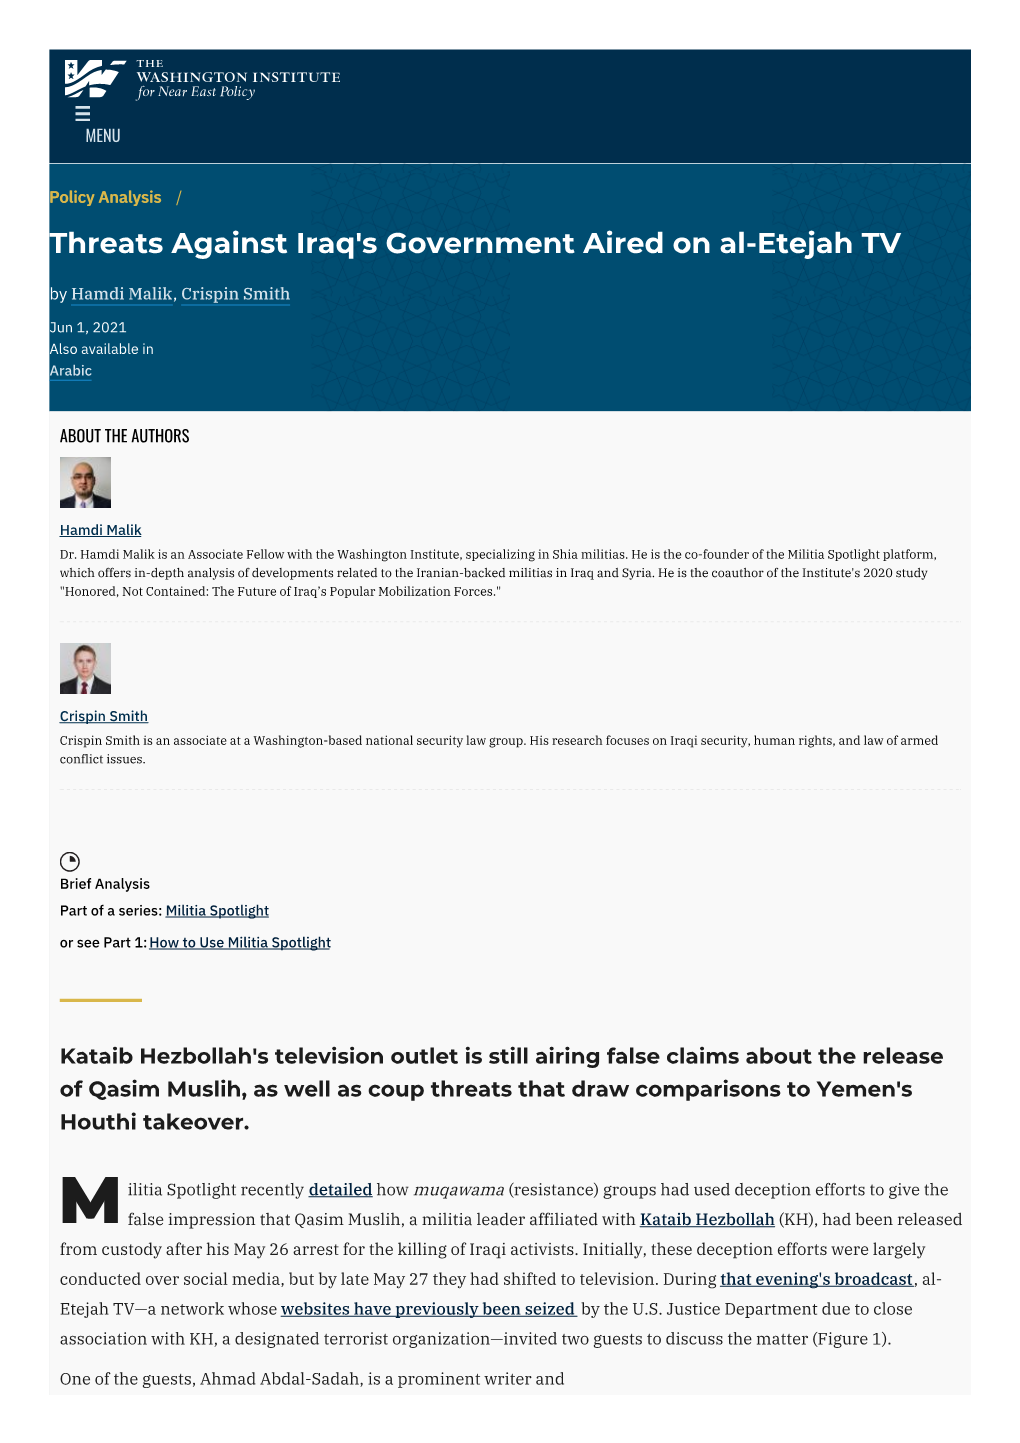 Threats Against Iraq's Government Aired on Al-Etejah TV by Hamdi Malik, Crispin Smith